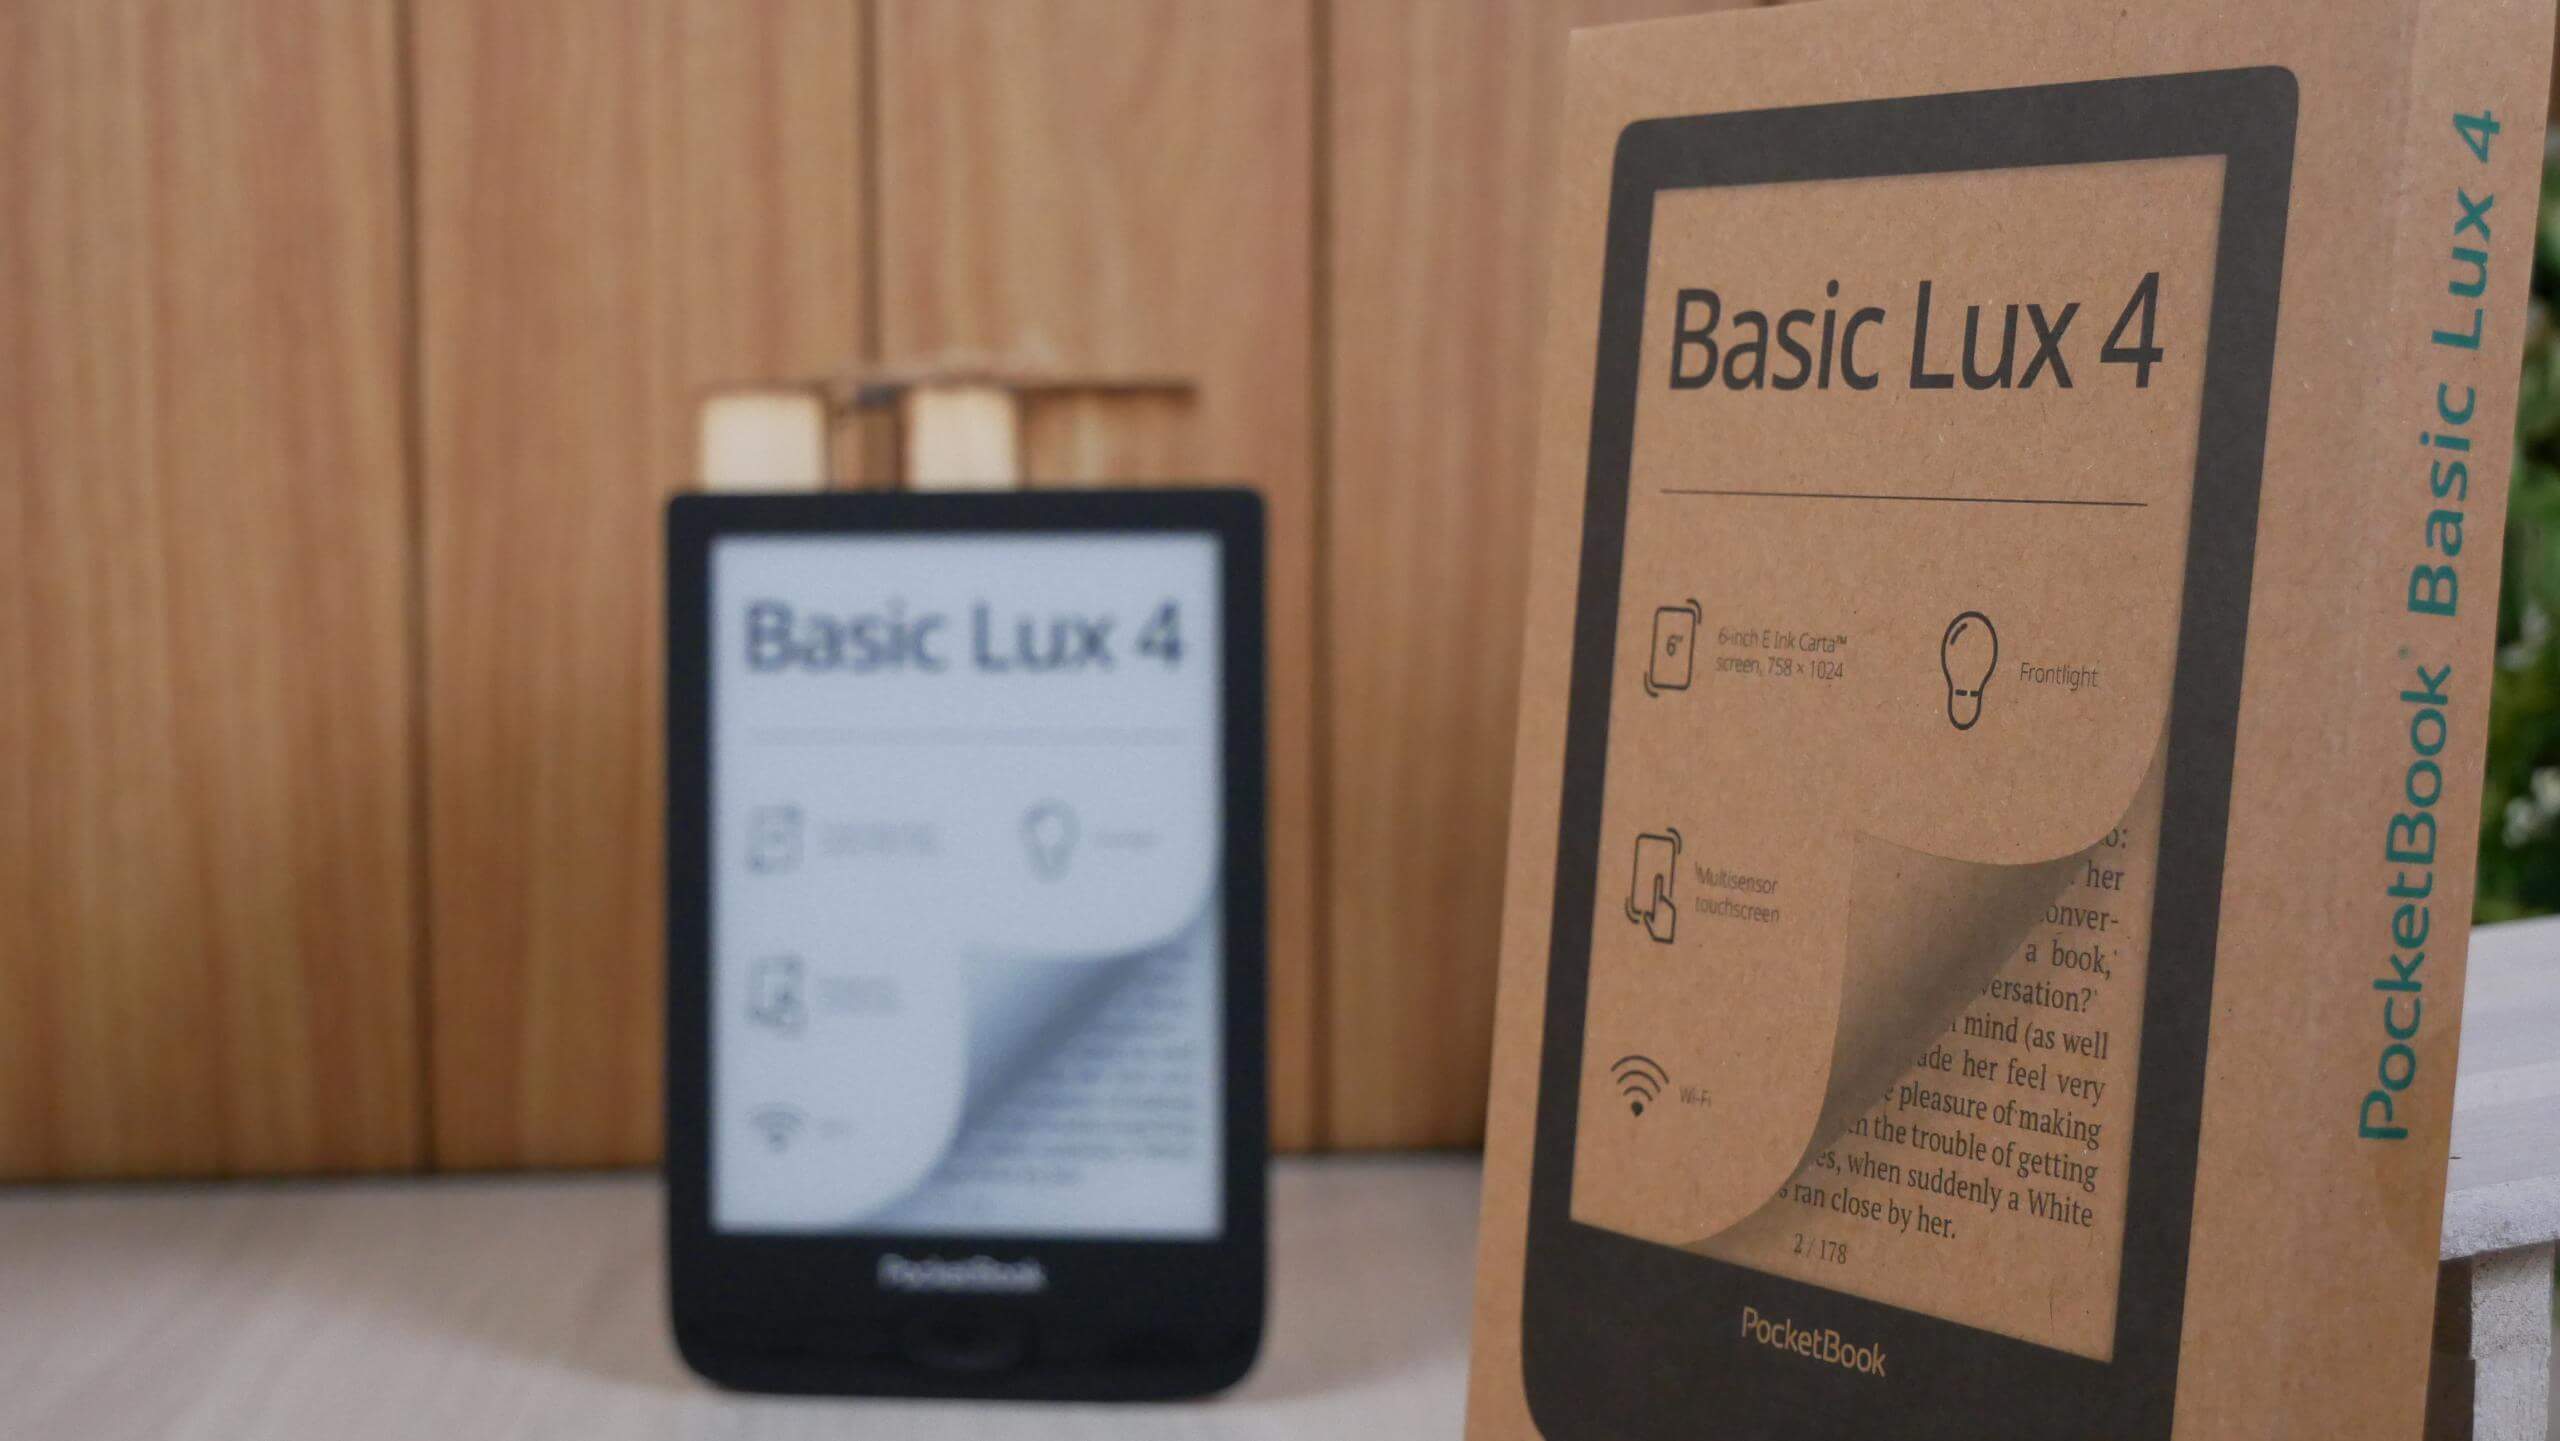 Lux First Good e-Reader Pocketbook - at the 4 Basic look